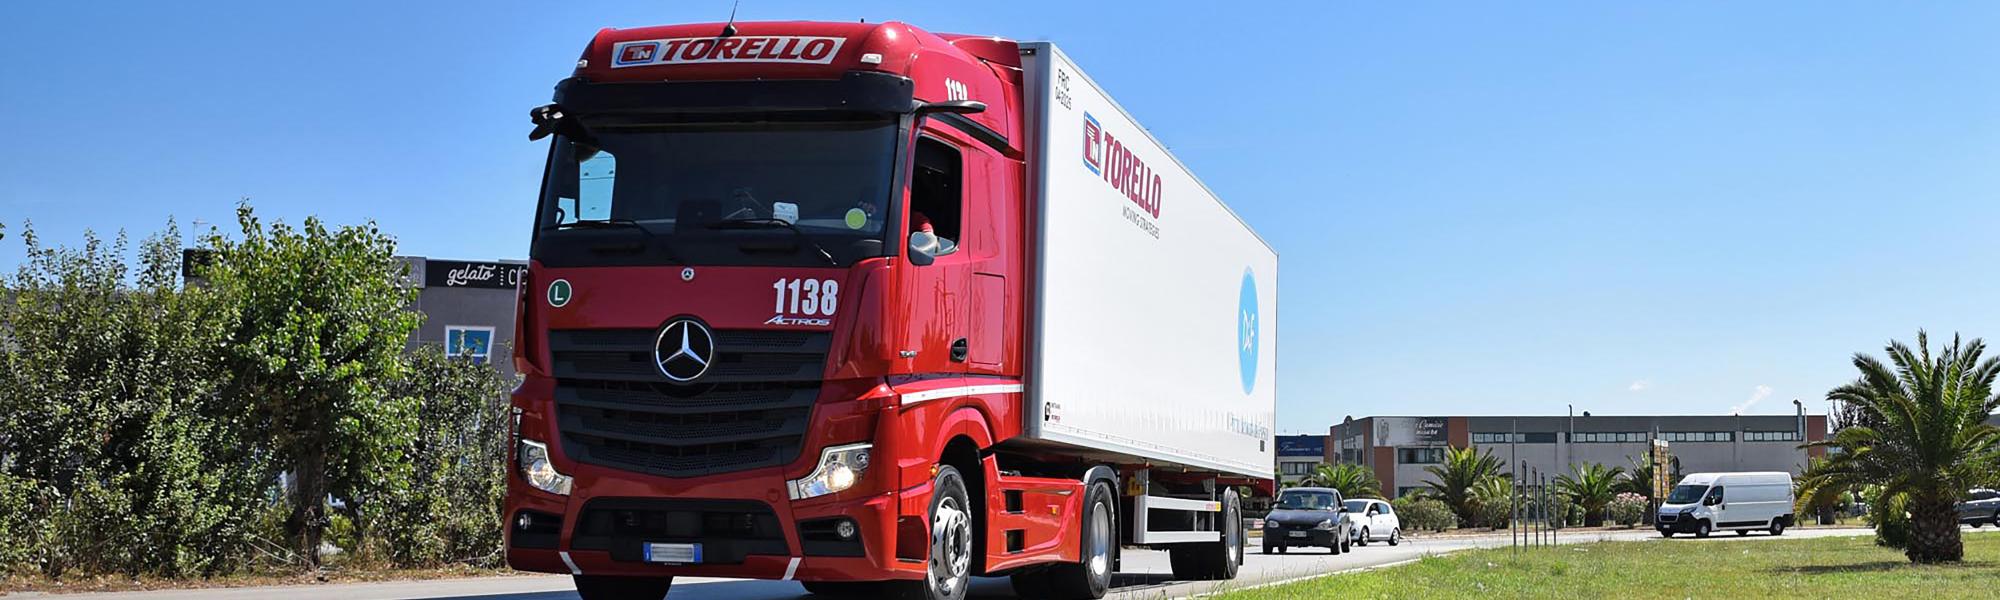 Torello joins IRU to drive action on key logistics industry issues